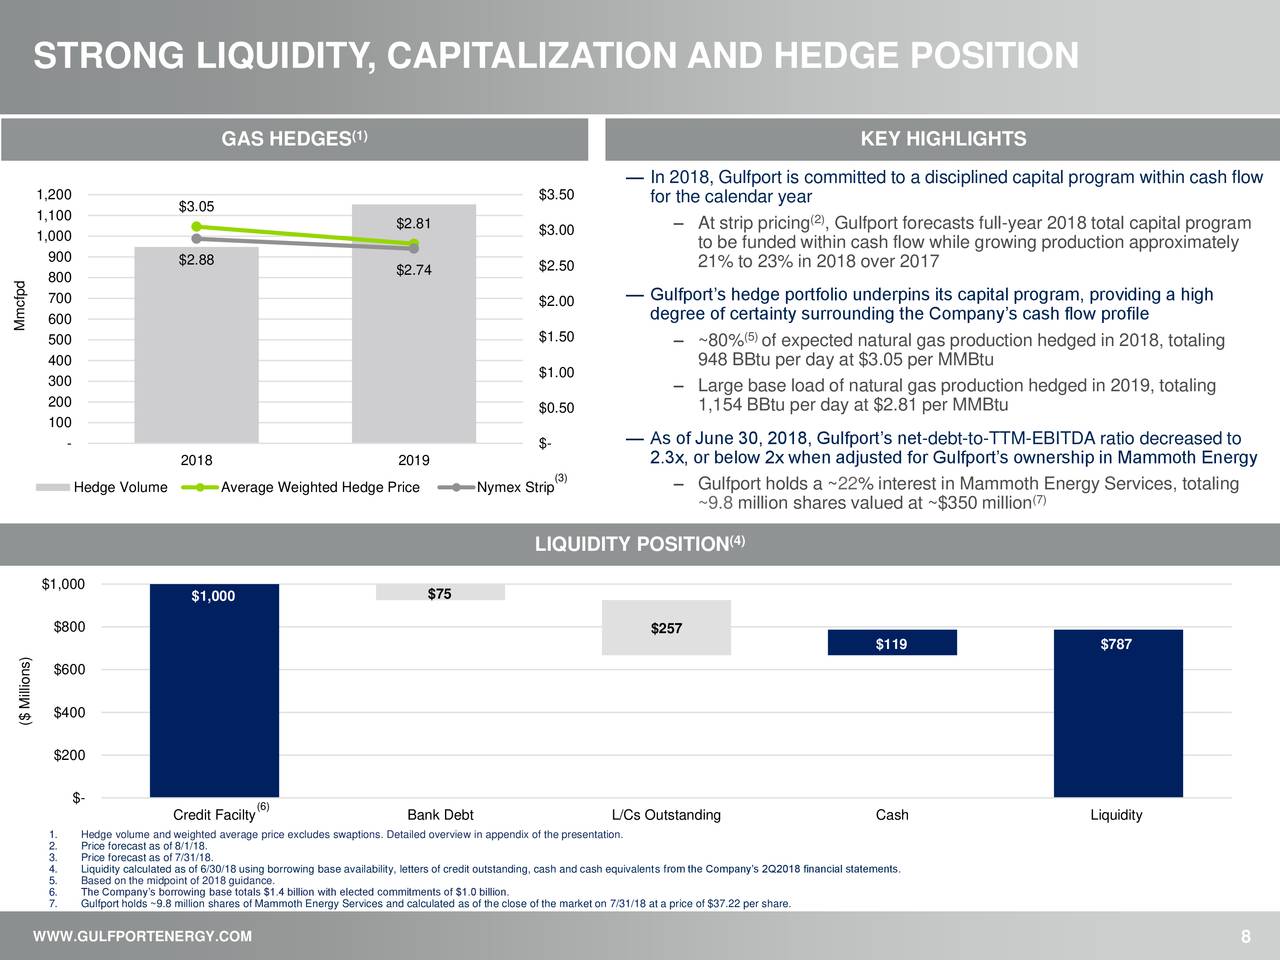 STRONG LIQUIDITY, CAPITALIZATION AND HEDGE POSITION